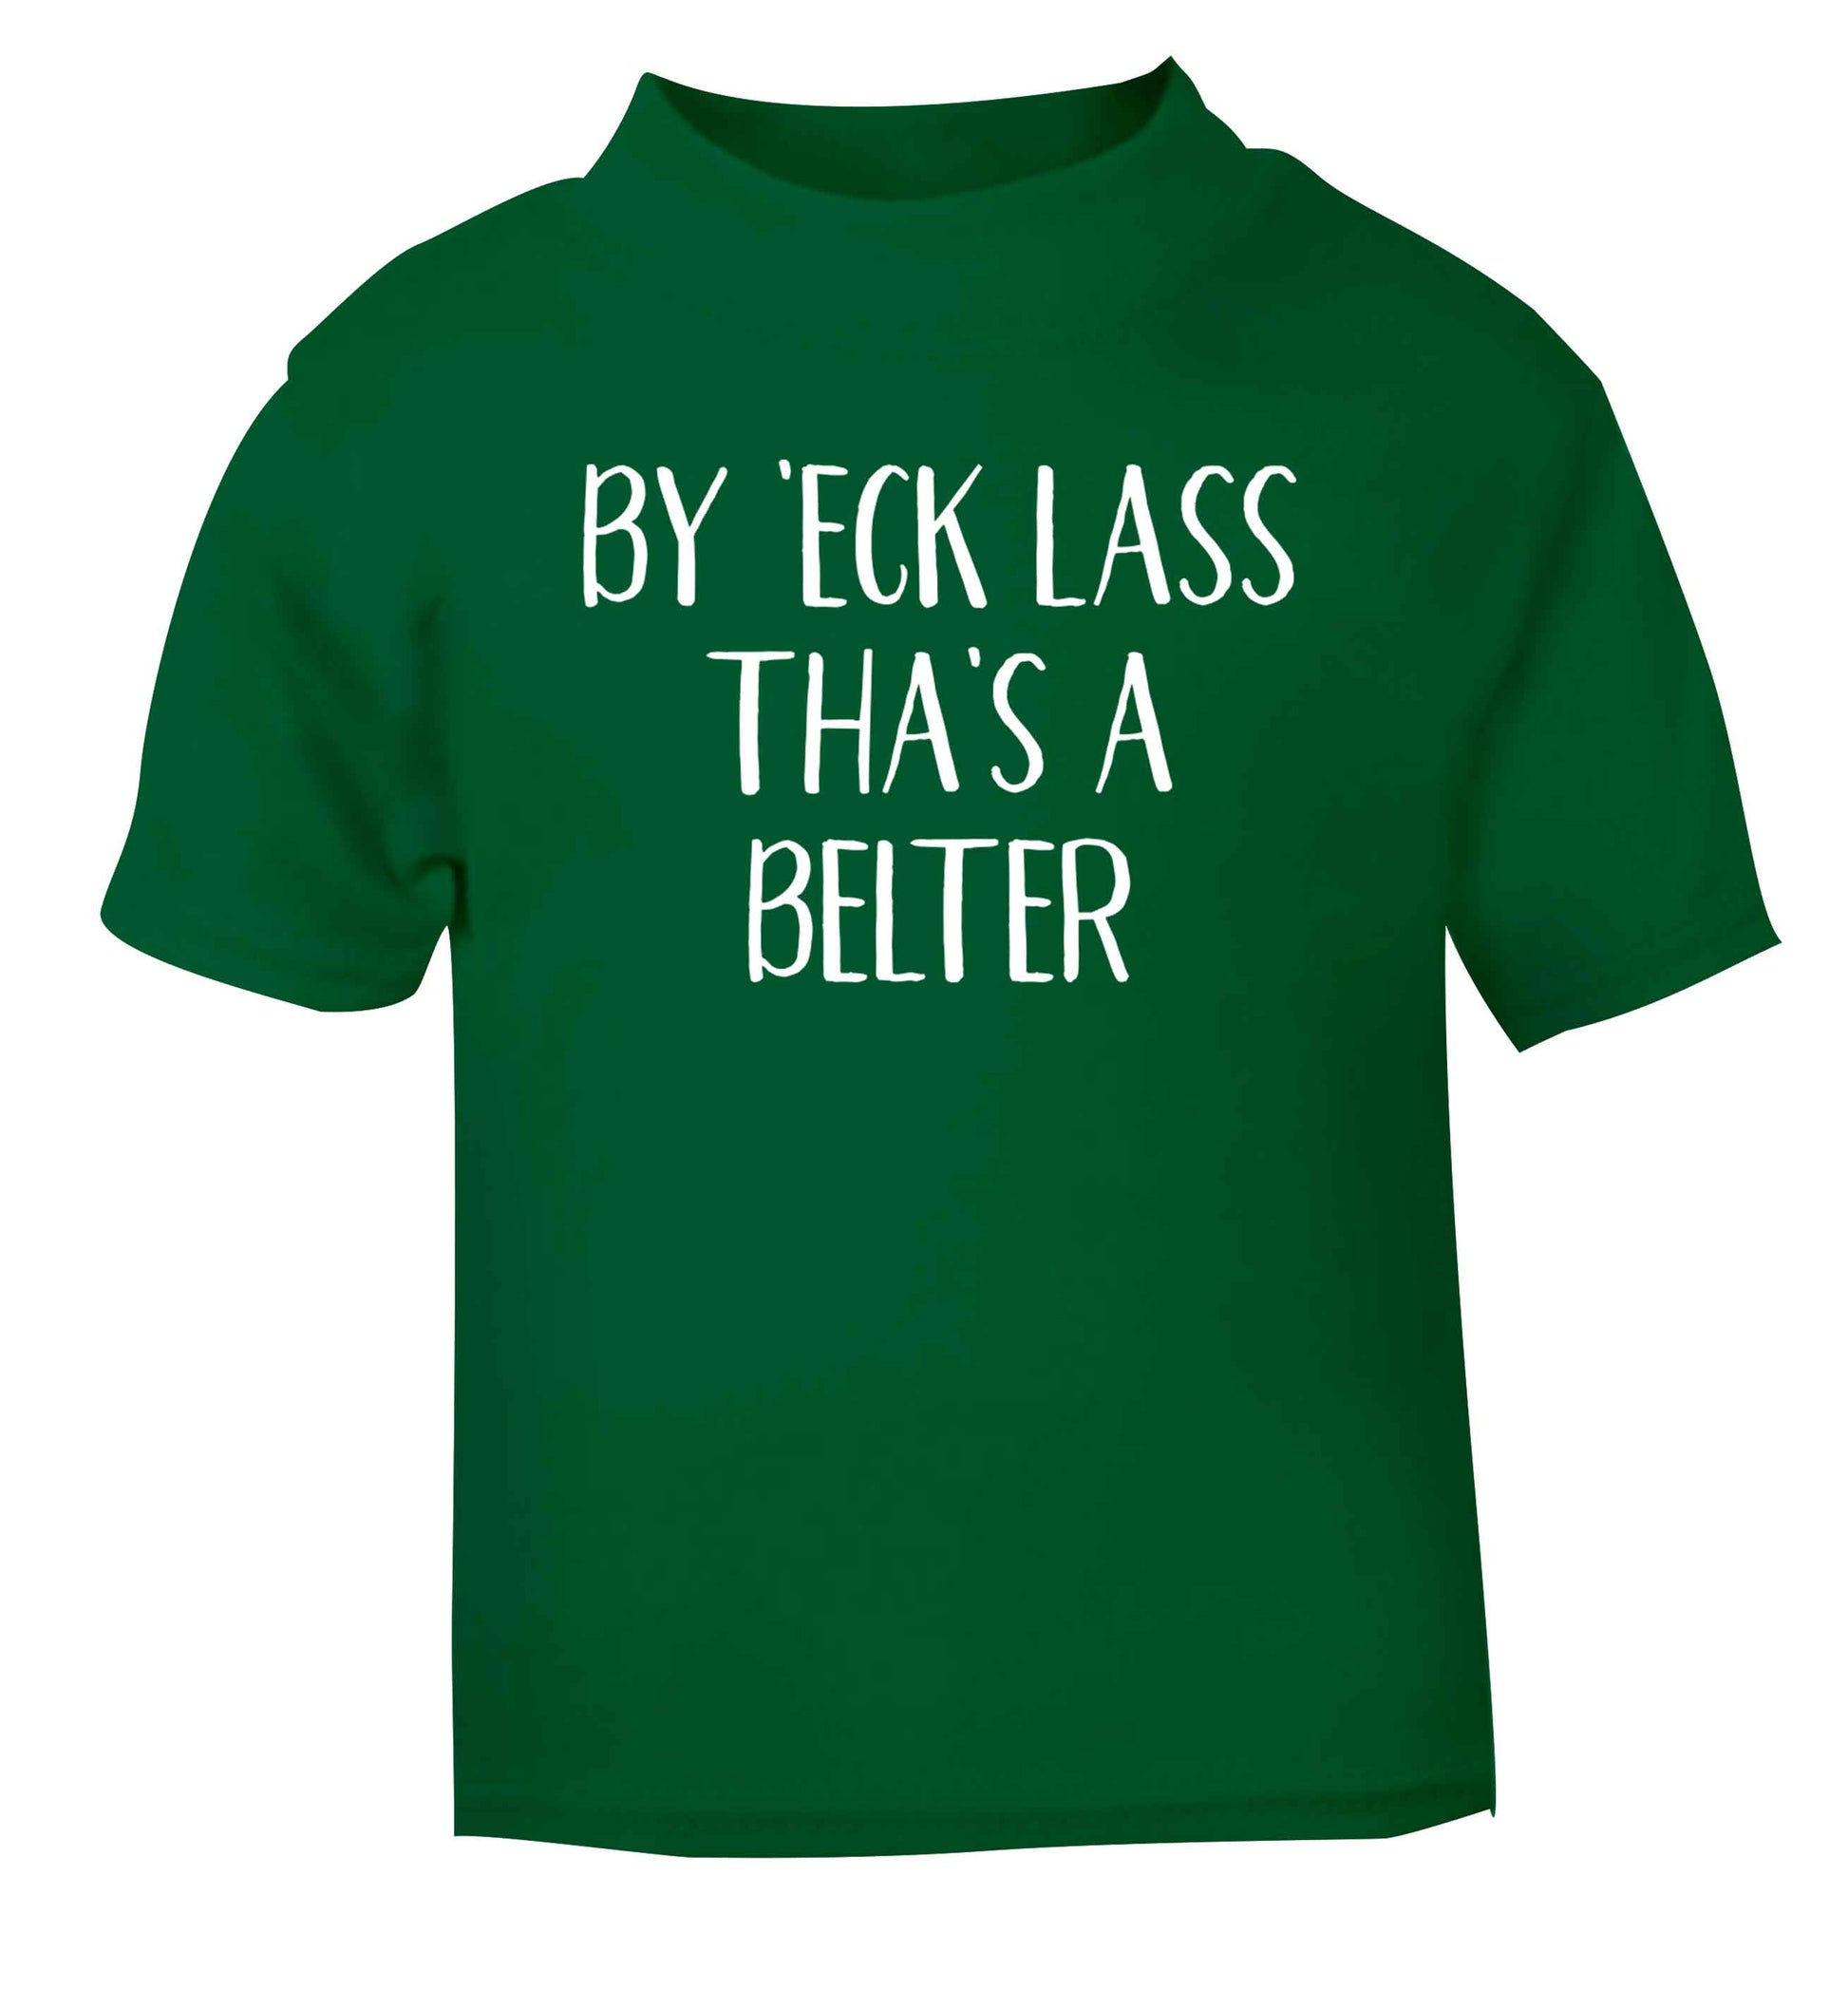 Be 'eck lass tha's a belter green Baby Toddler Tshirt 2 Years